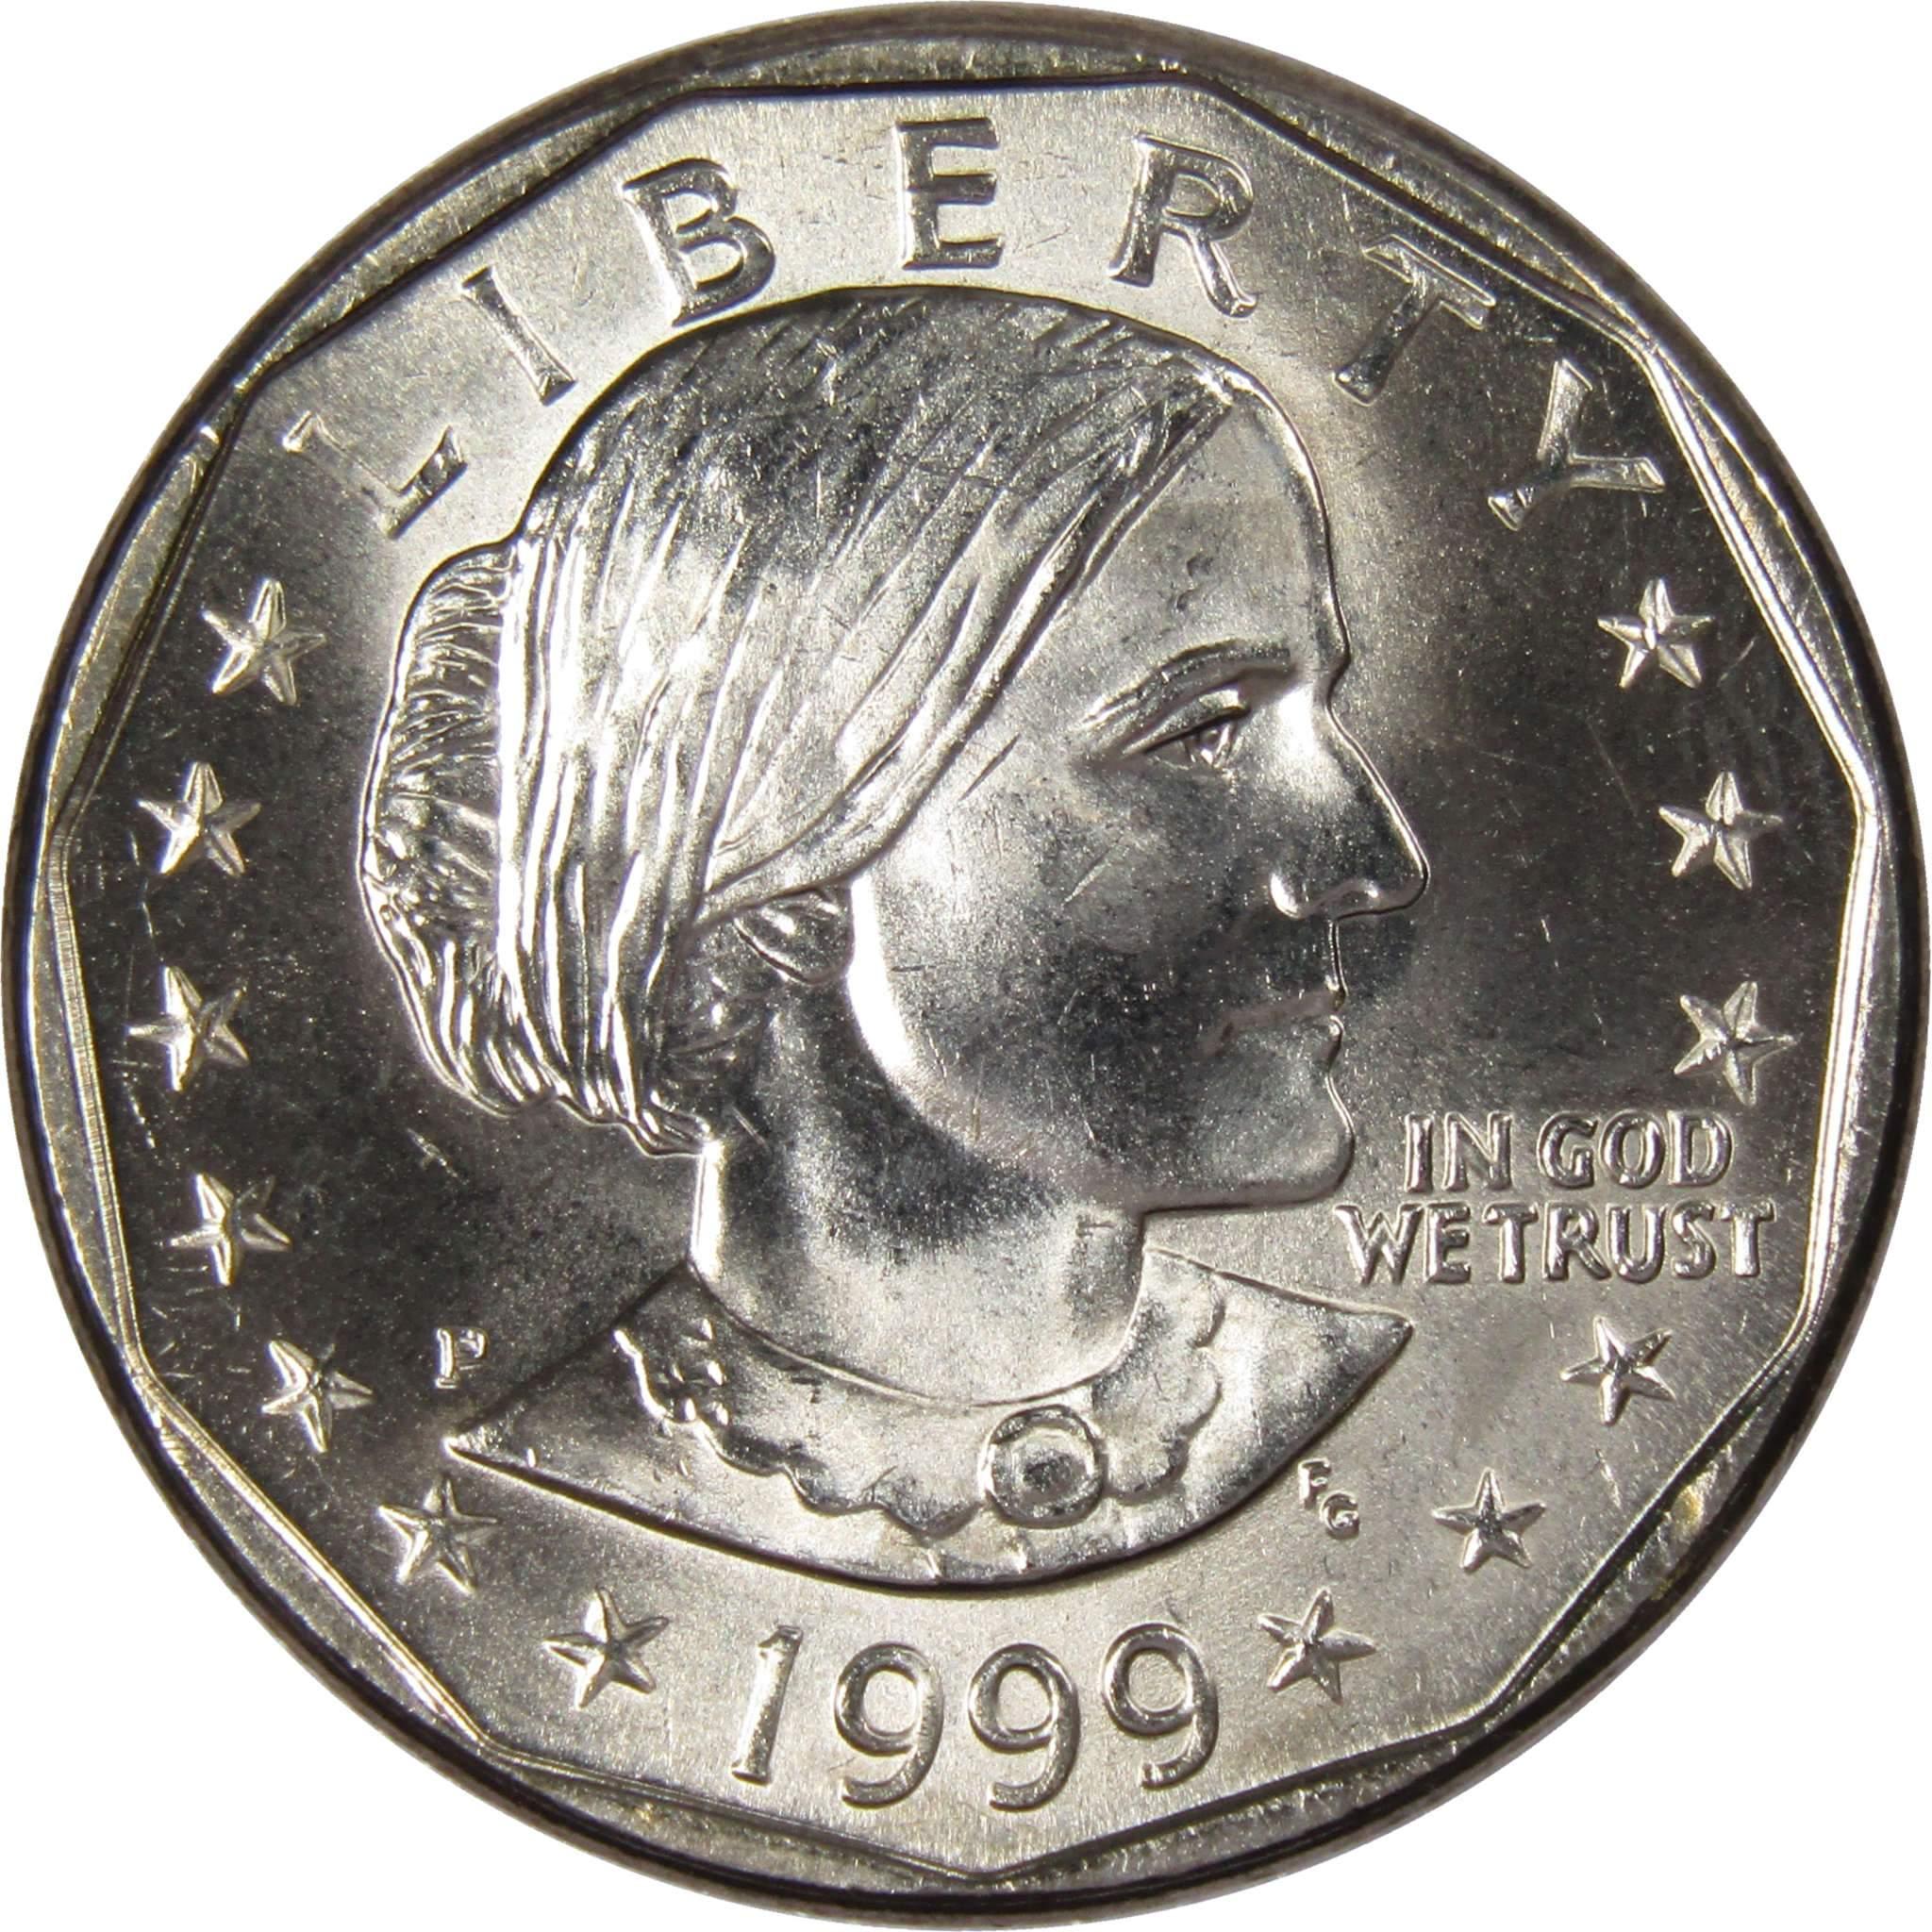 1999 P Susan B Anthony Dollar BU Uncirculated Mint State SBA $1 US Coin